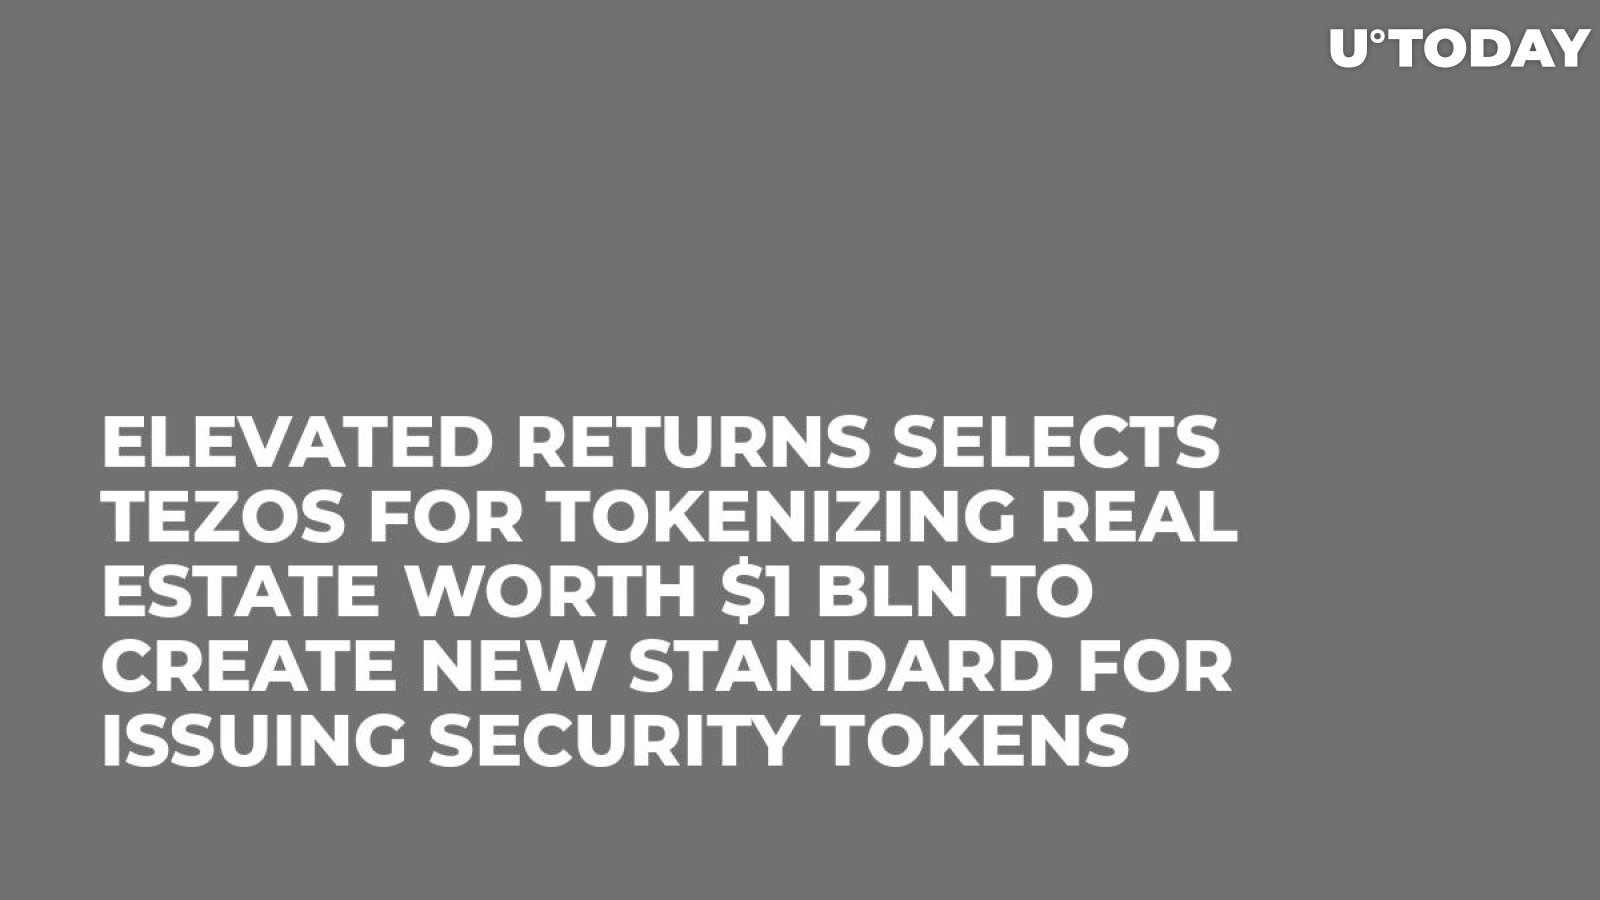 Elevated Returns Selects Tezos for Tokenizing Real Estate Worth $1 Bln to Create New Standard for Issuing Security Tokens